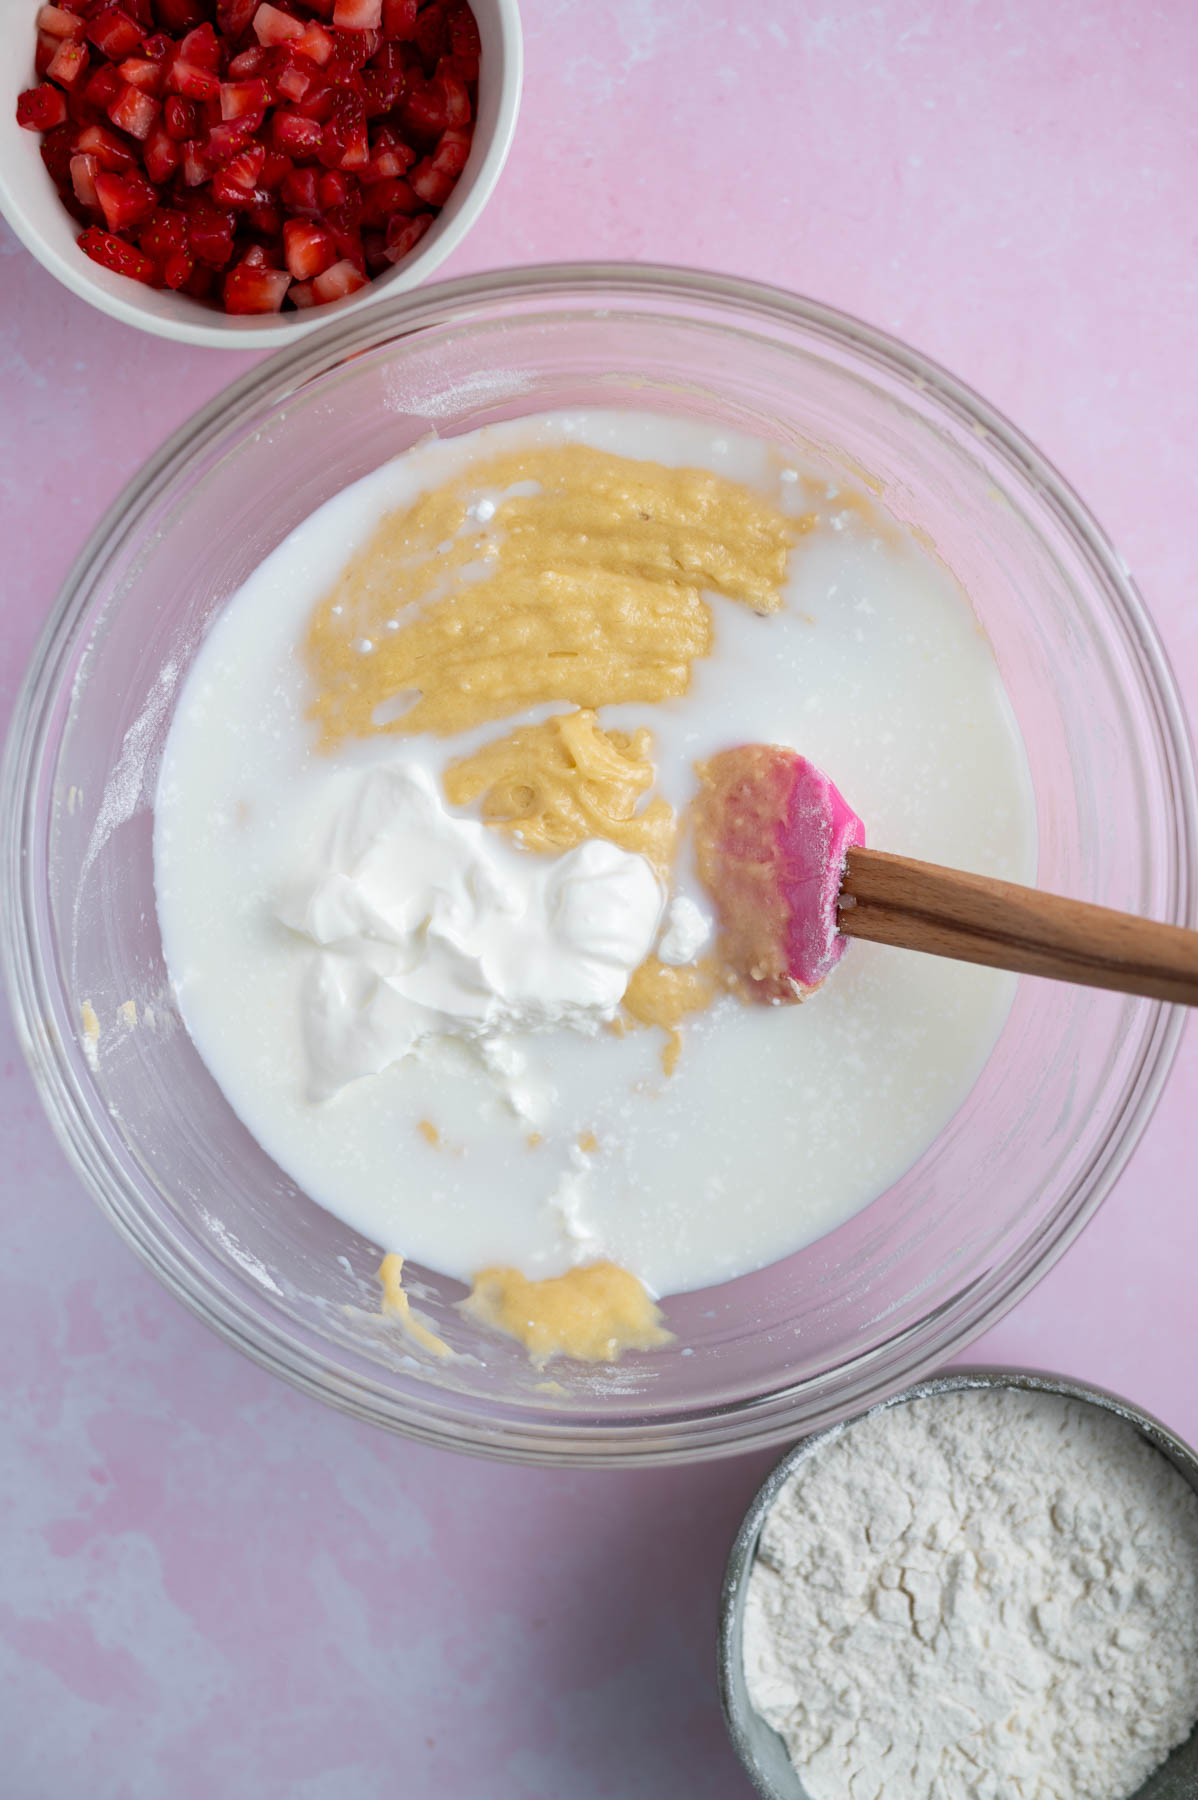 sour cream and milk added to snack cake batter